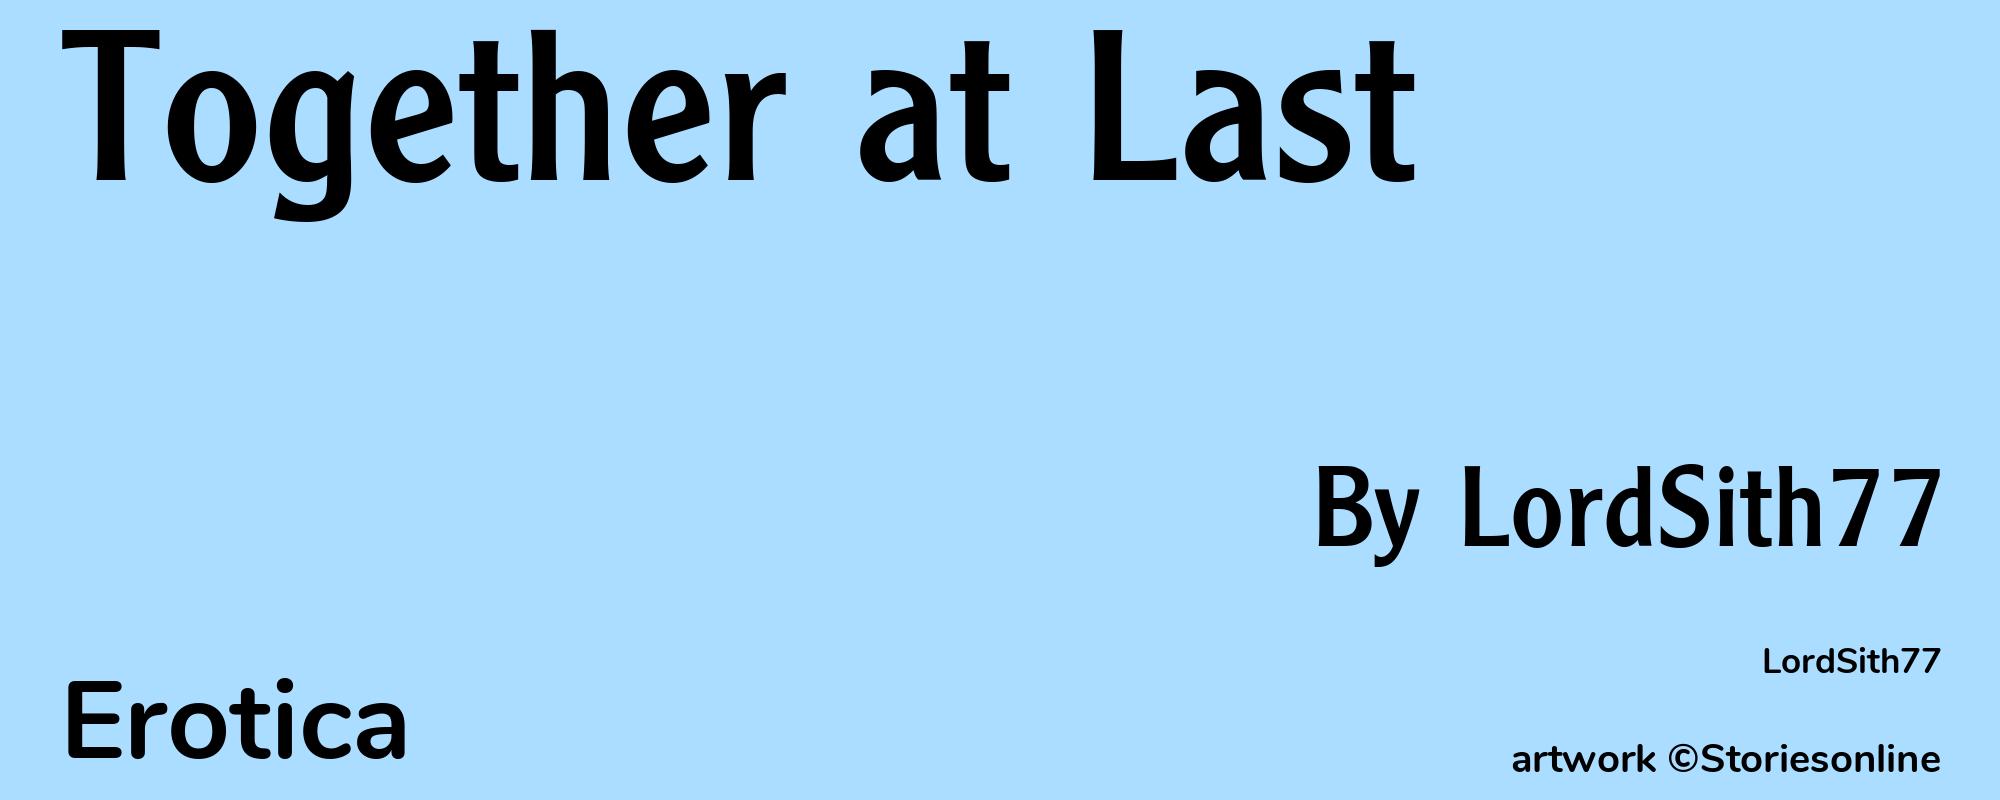 Together at Last - Cover